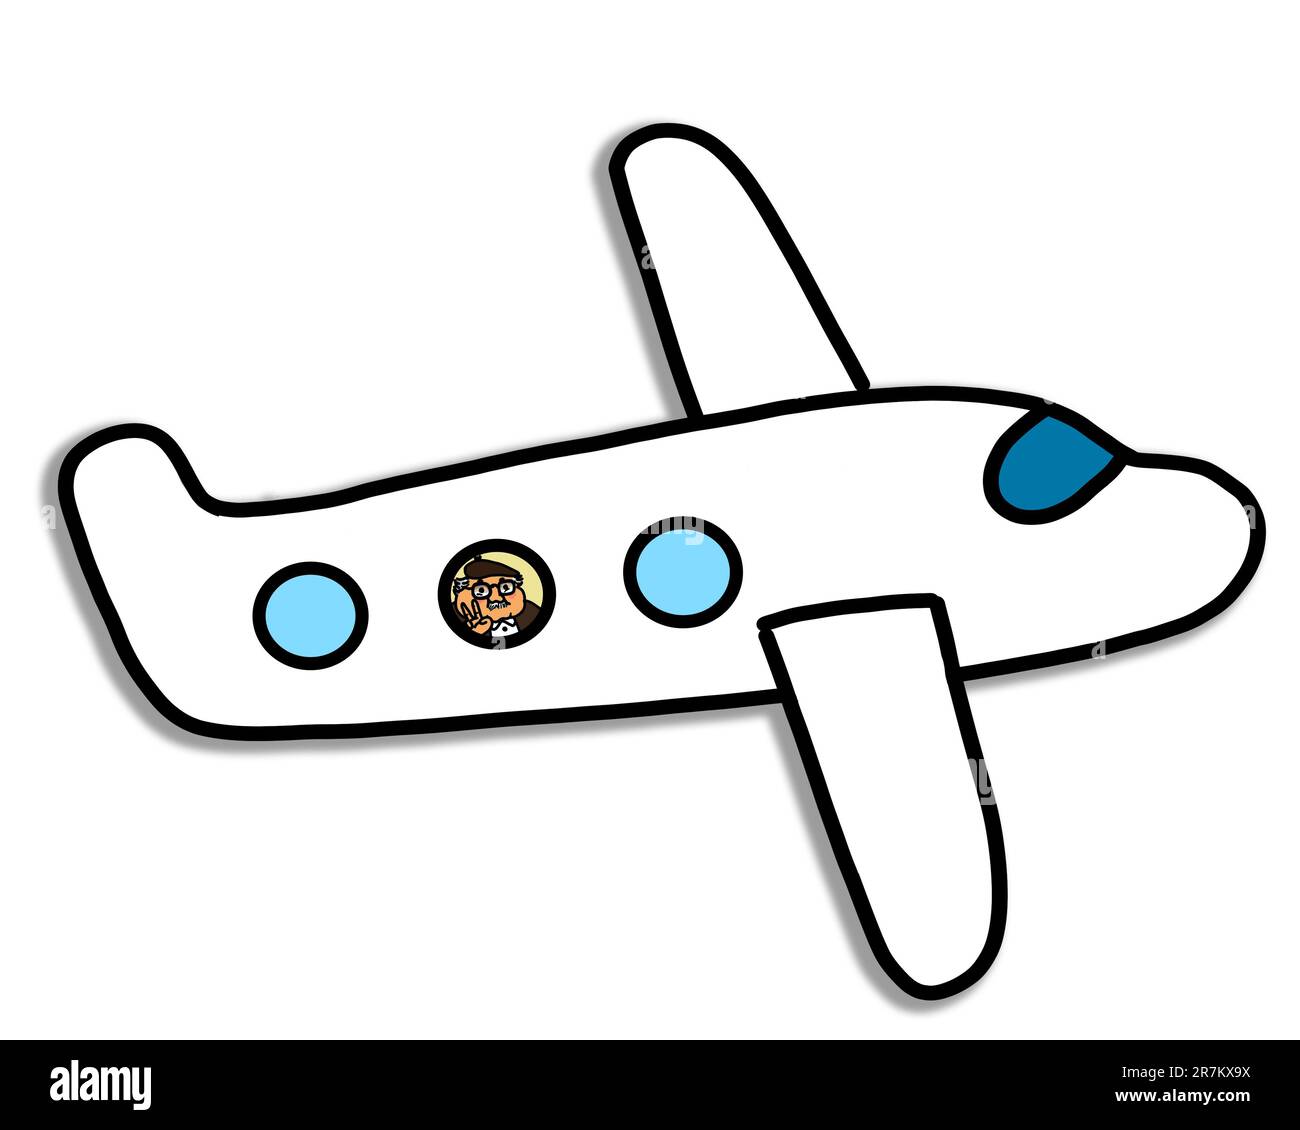 Airplane Doodles Vector Images (over 4,900)